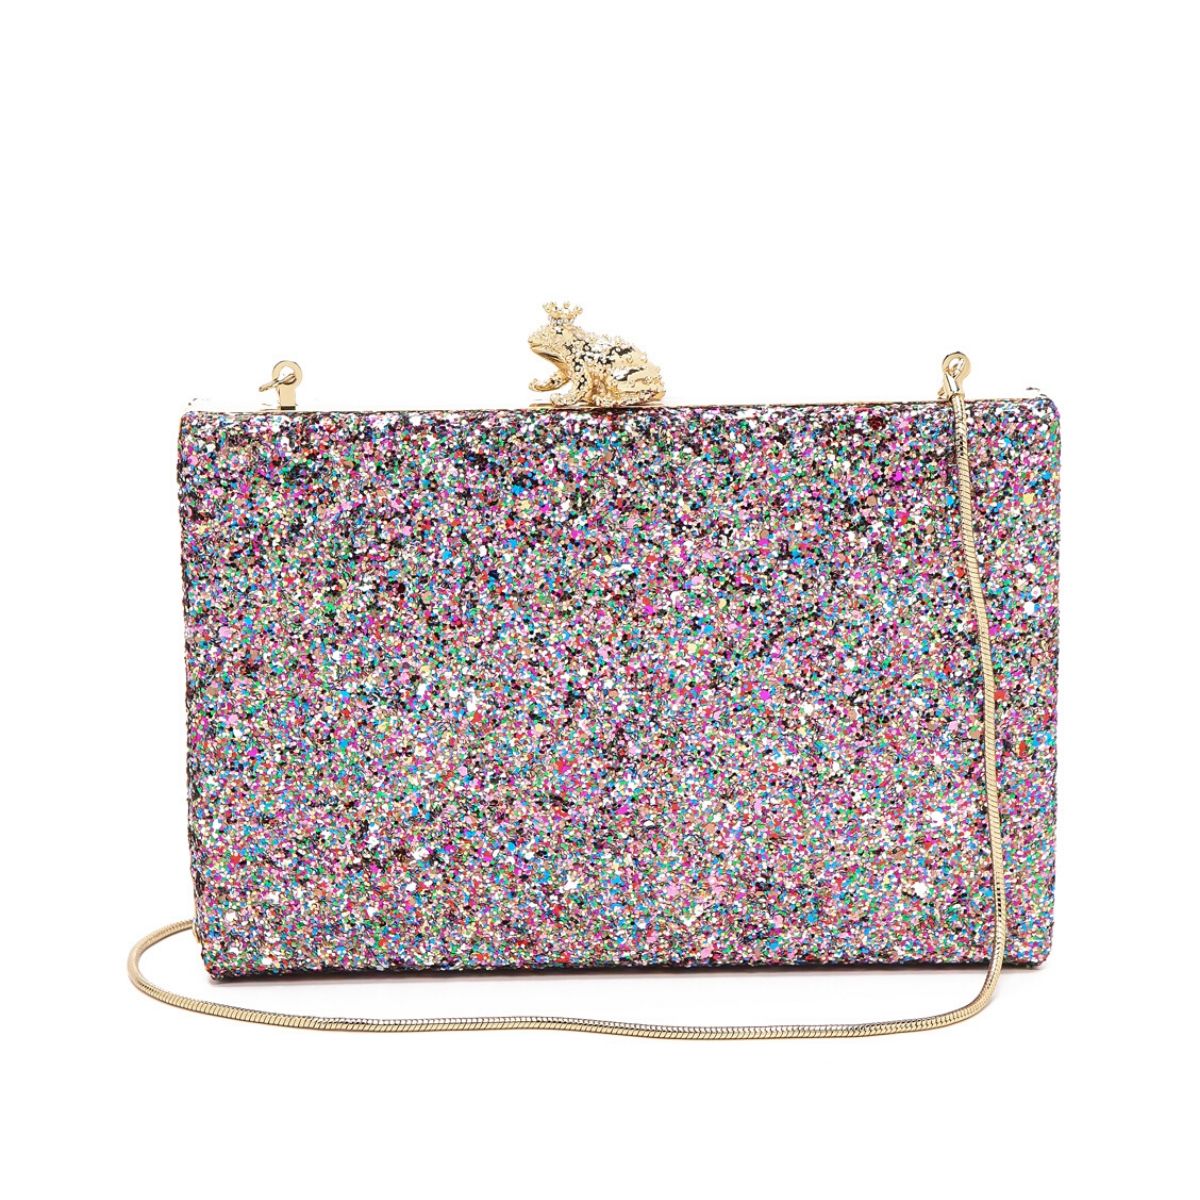 Move Along, Diamonds and Pearls—Vintage Handbags Are This Editor's BFF